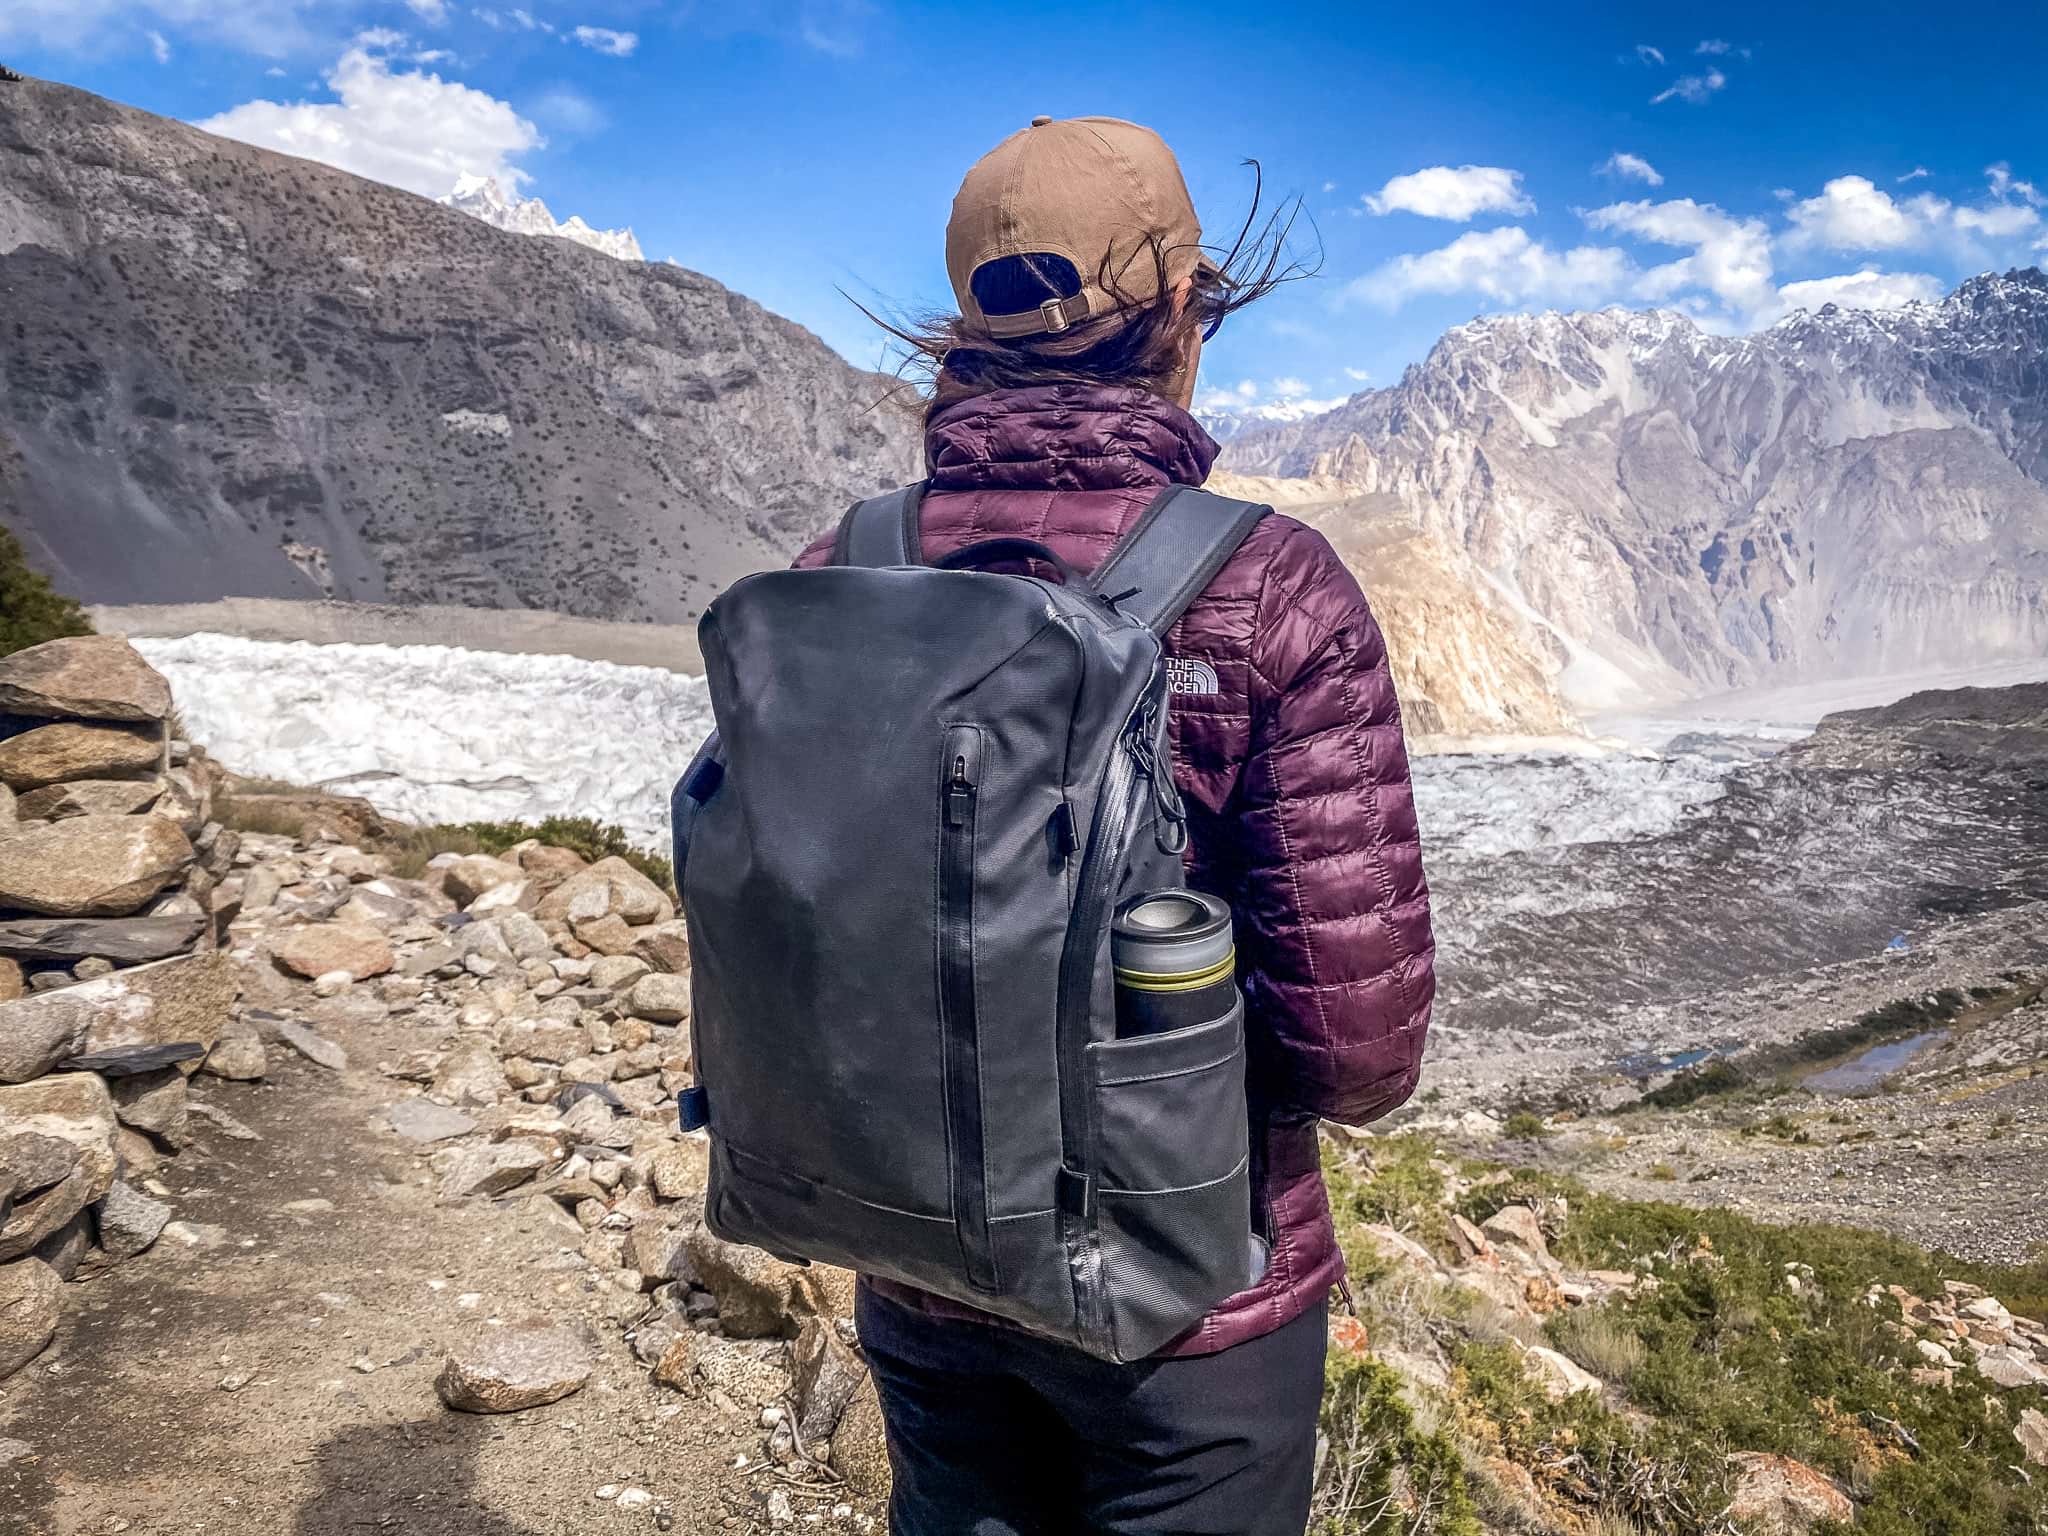 Wandrd Duo Daypack Review: Meet the New Wandrd Everyday Backpack